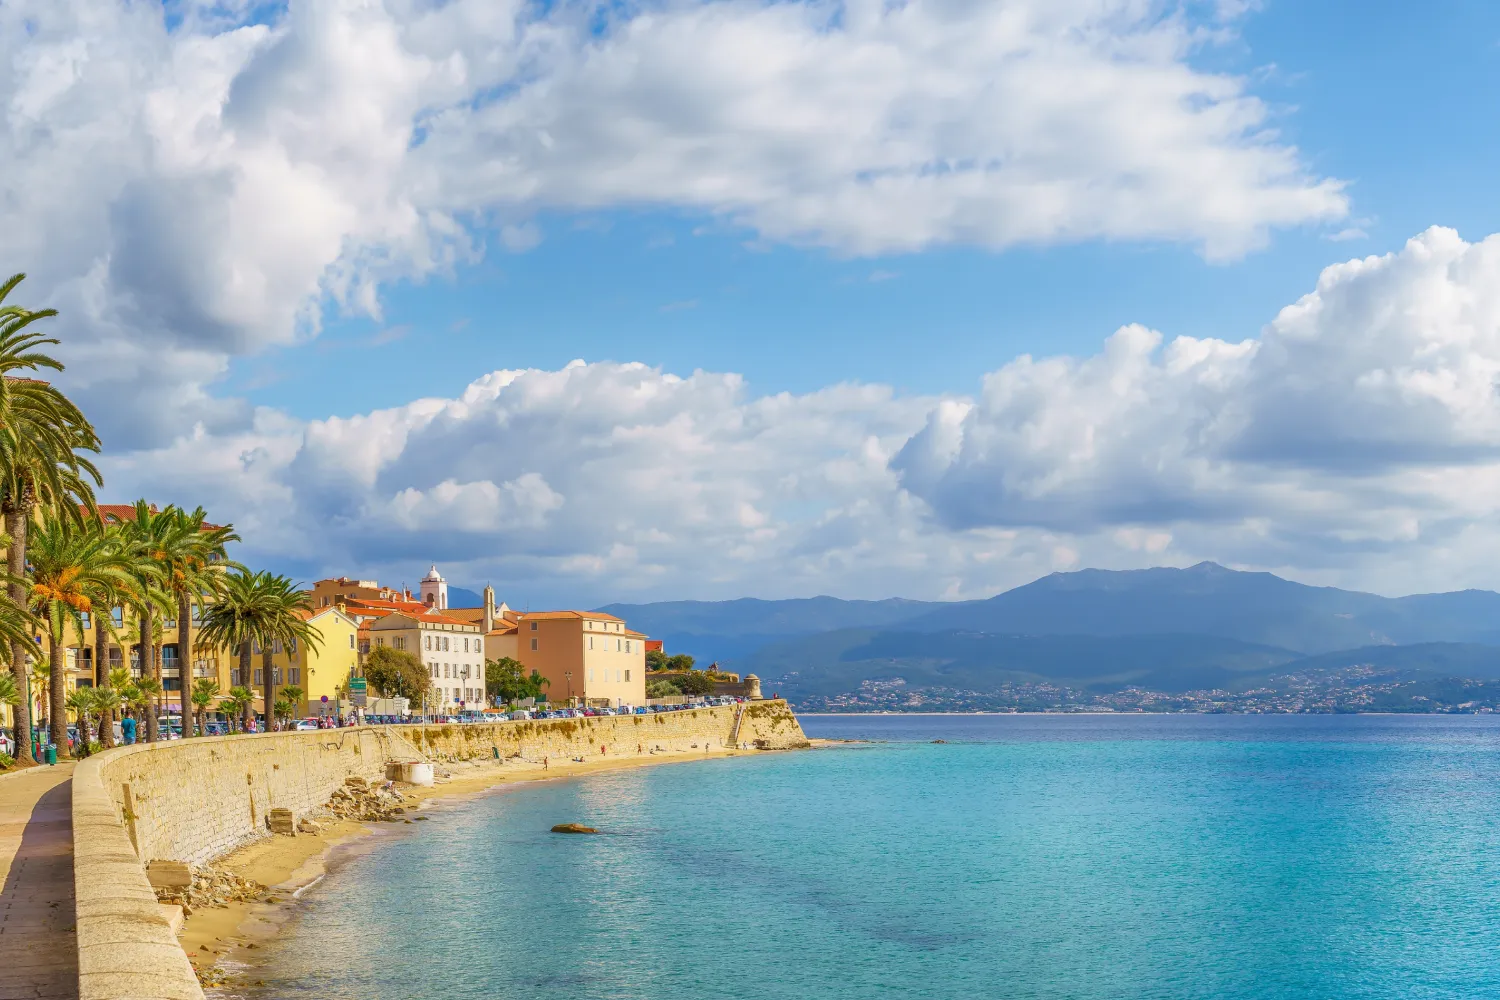 View of the promenade with Saint Francois Beach And the Old Citadel In Ajaccio